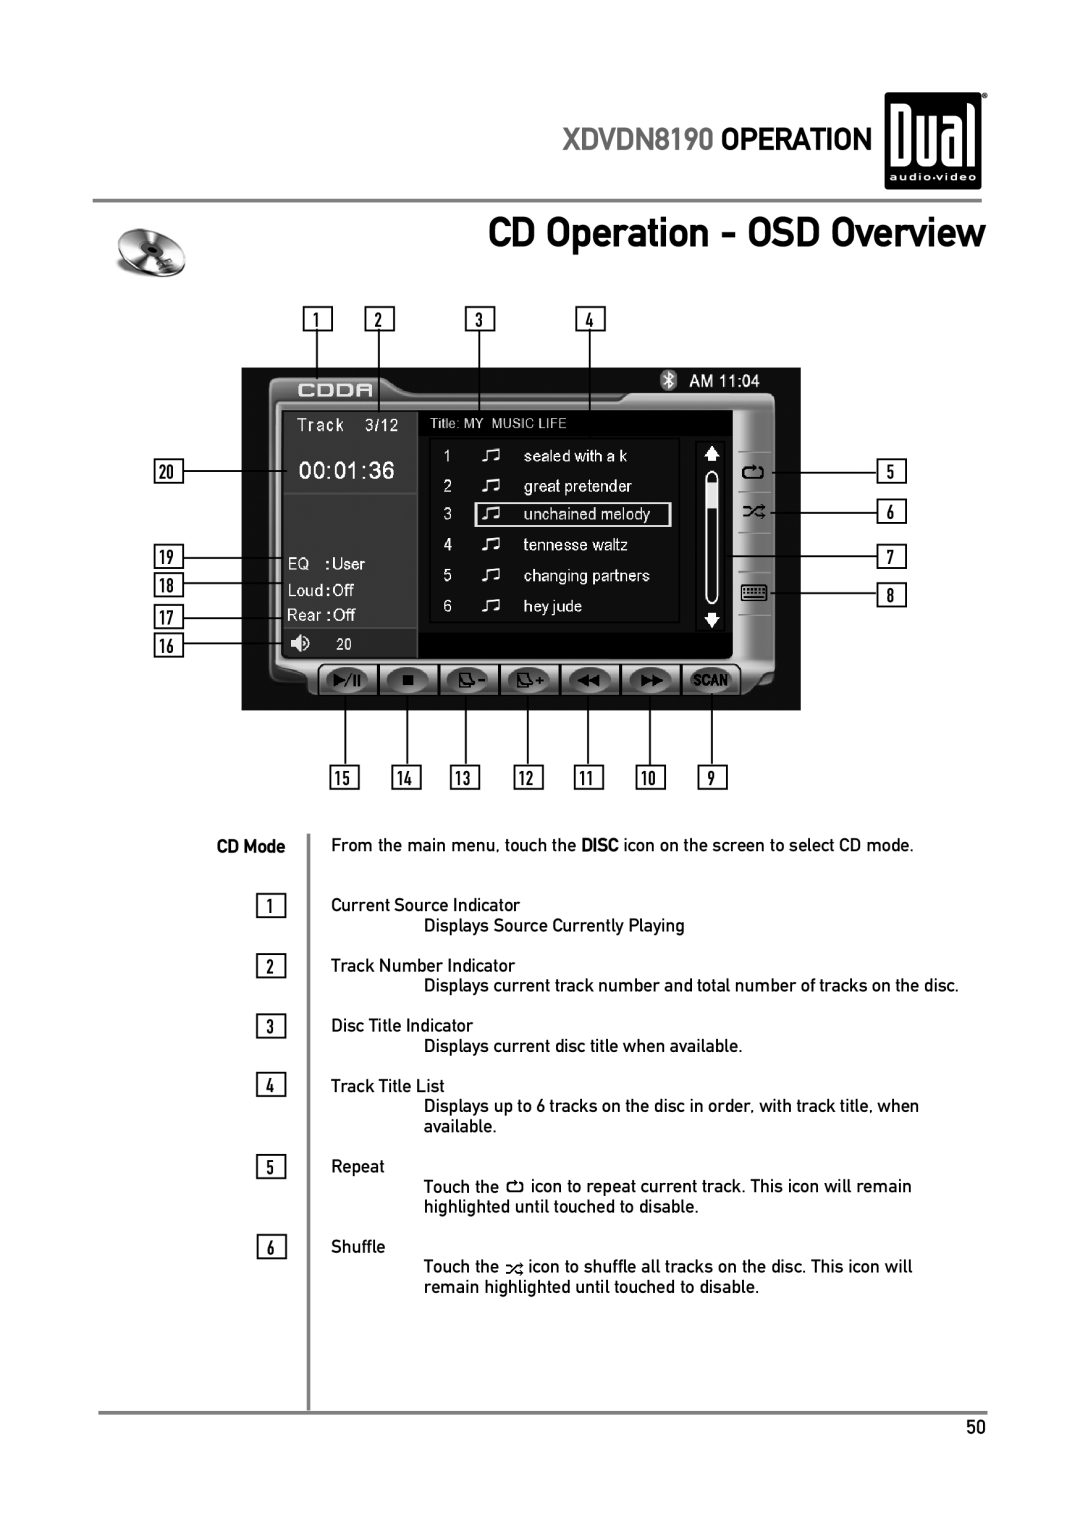 Dual owner manual CD Operation - OSD Overview, XDVDN8190 OPERATION, CD Mode 